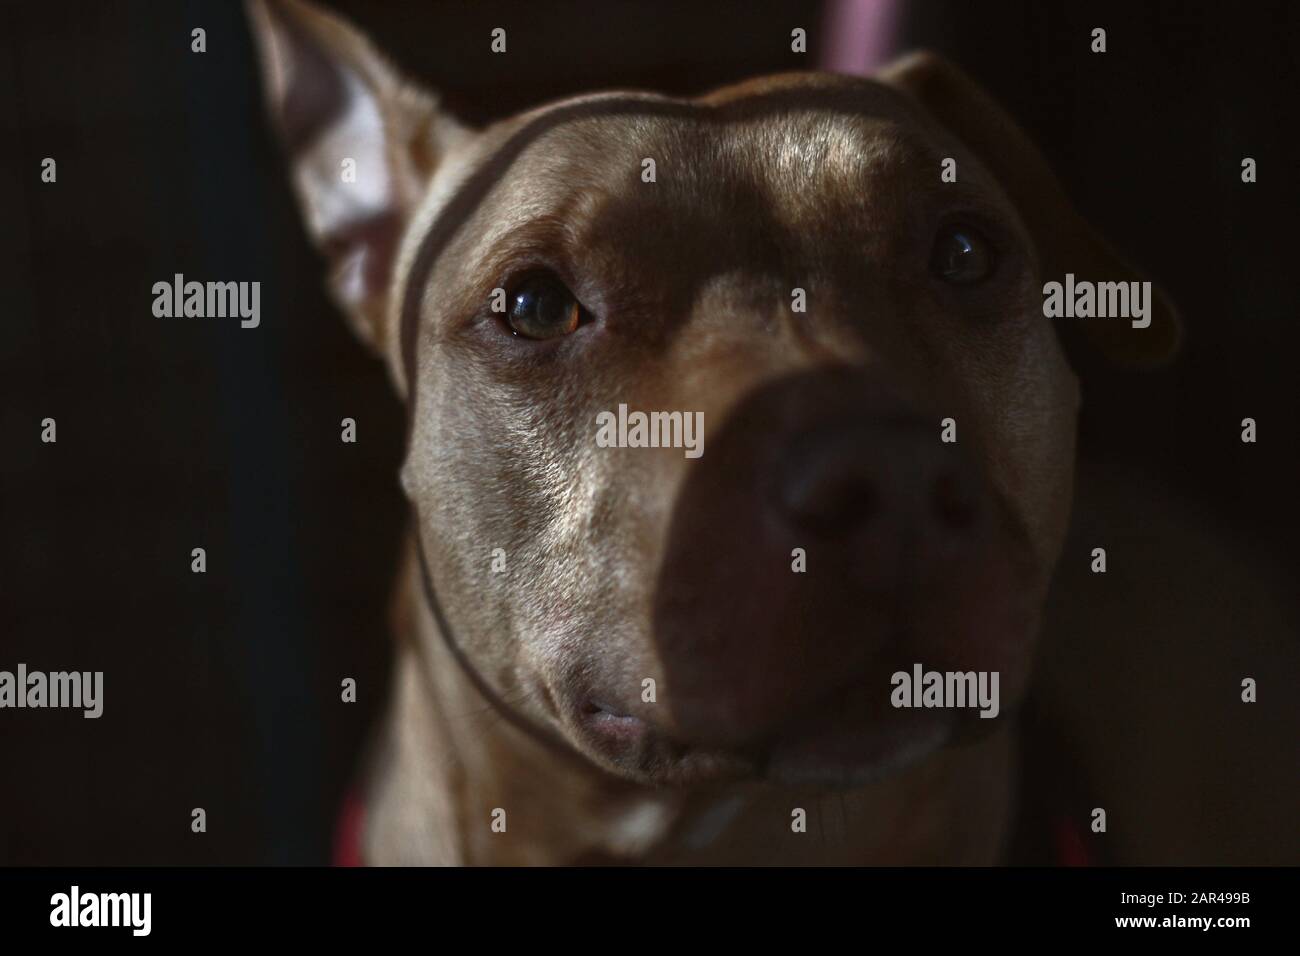 This is a Photo of a Sad Looking Pitbull, to bring awareness to animal abuse and cruelty. The dog name is Molly, a rescue and success story. Stock Photo